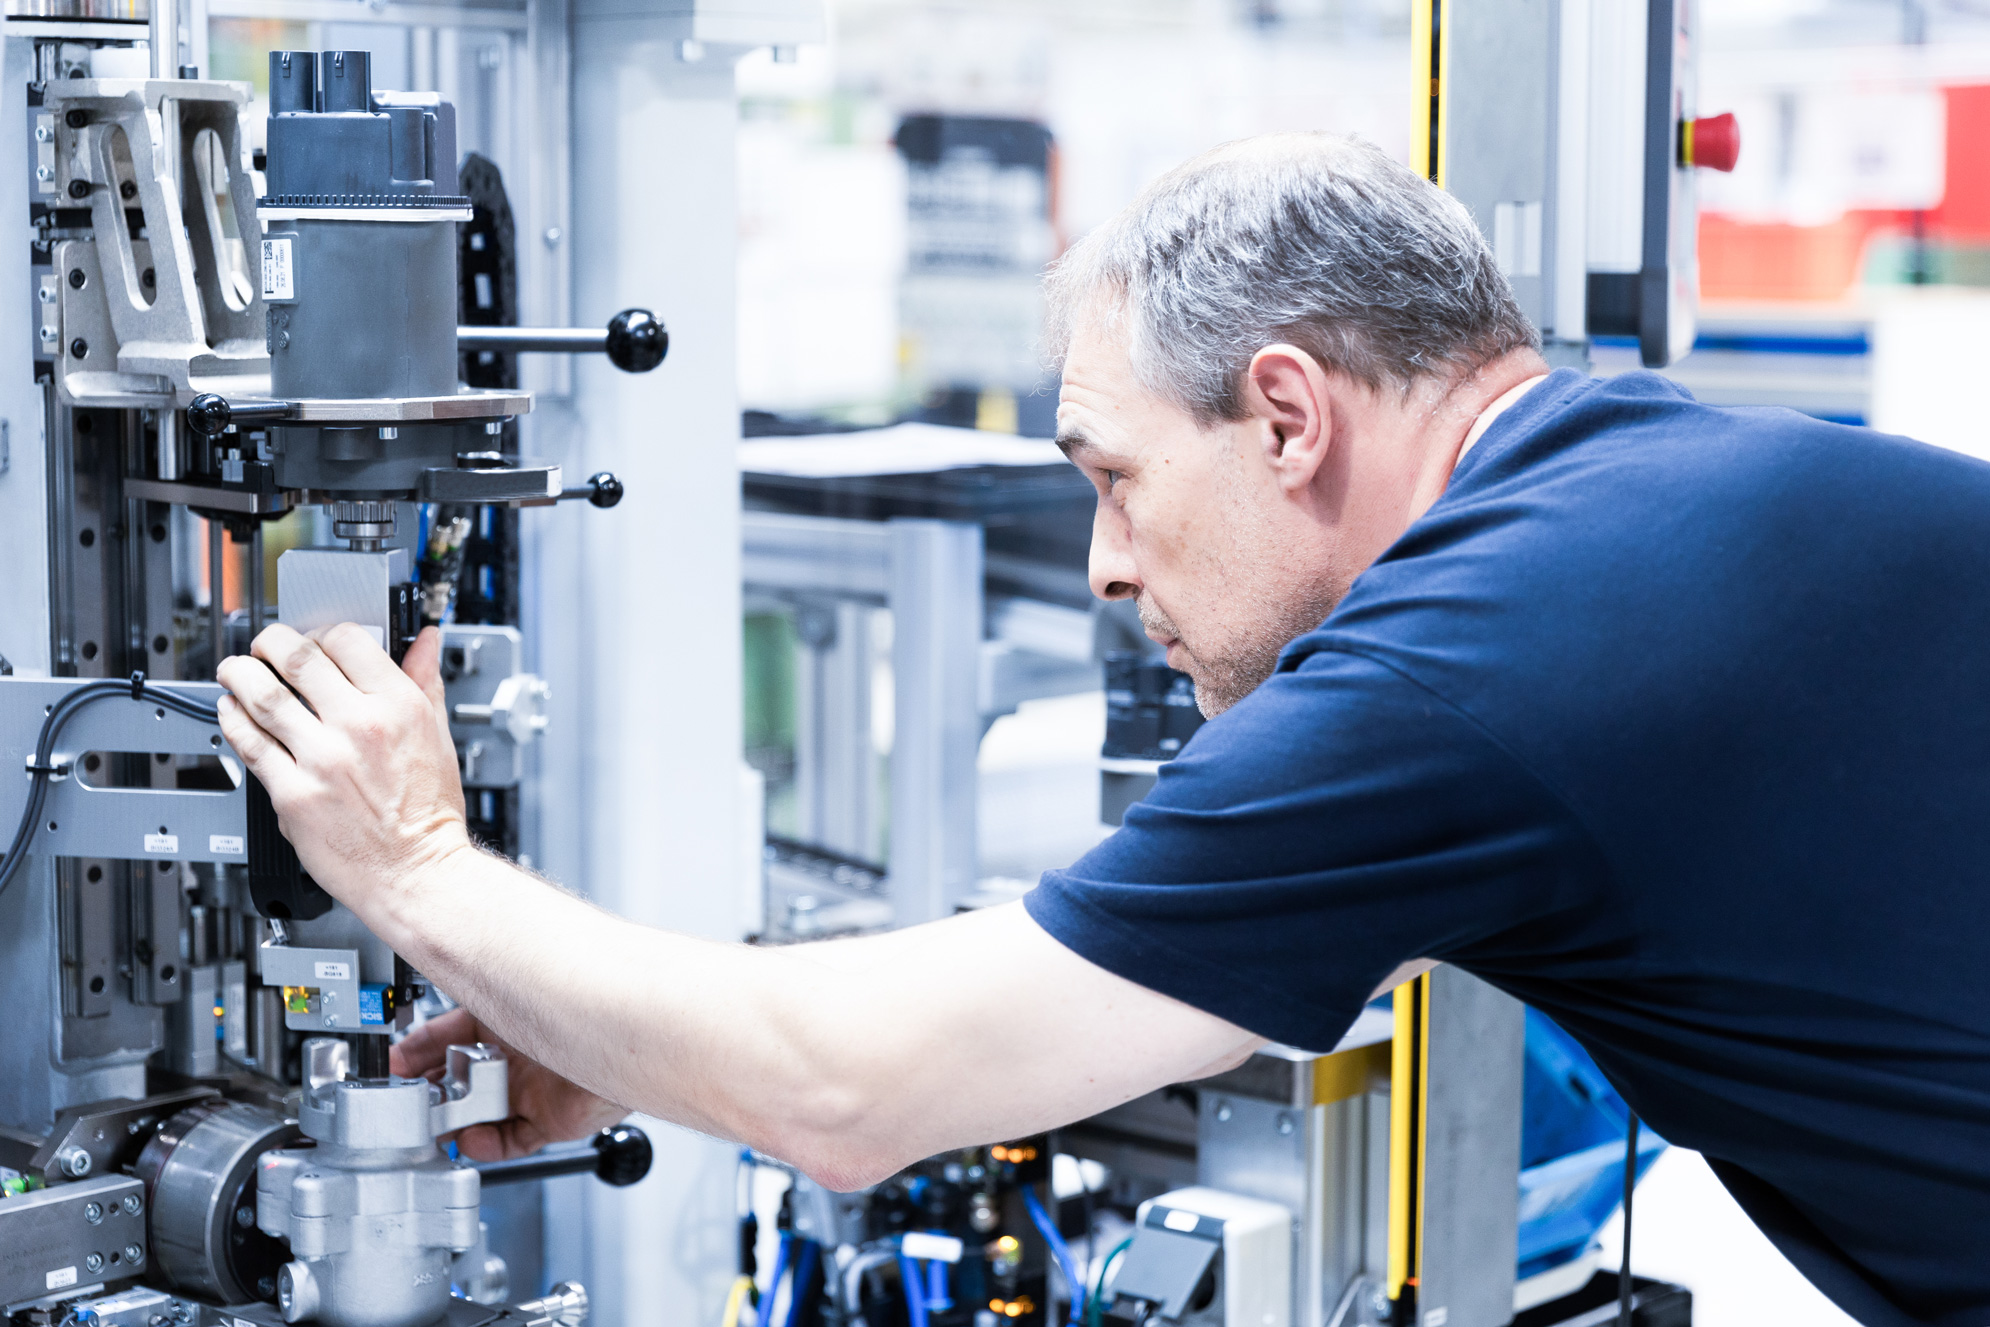 A specially trained expert performs a visual inspection on the assembly line of innovative power steering pumps.